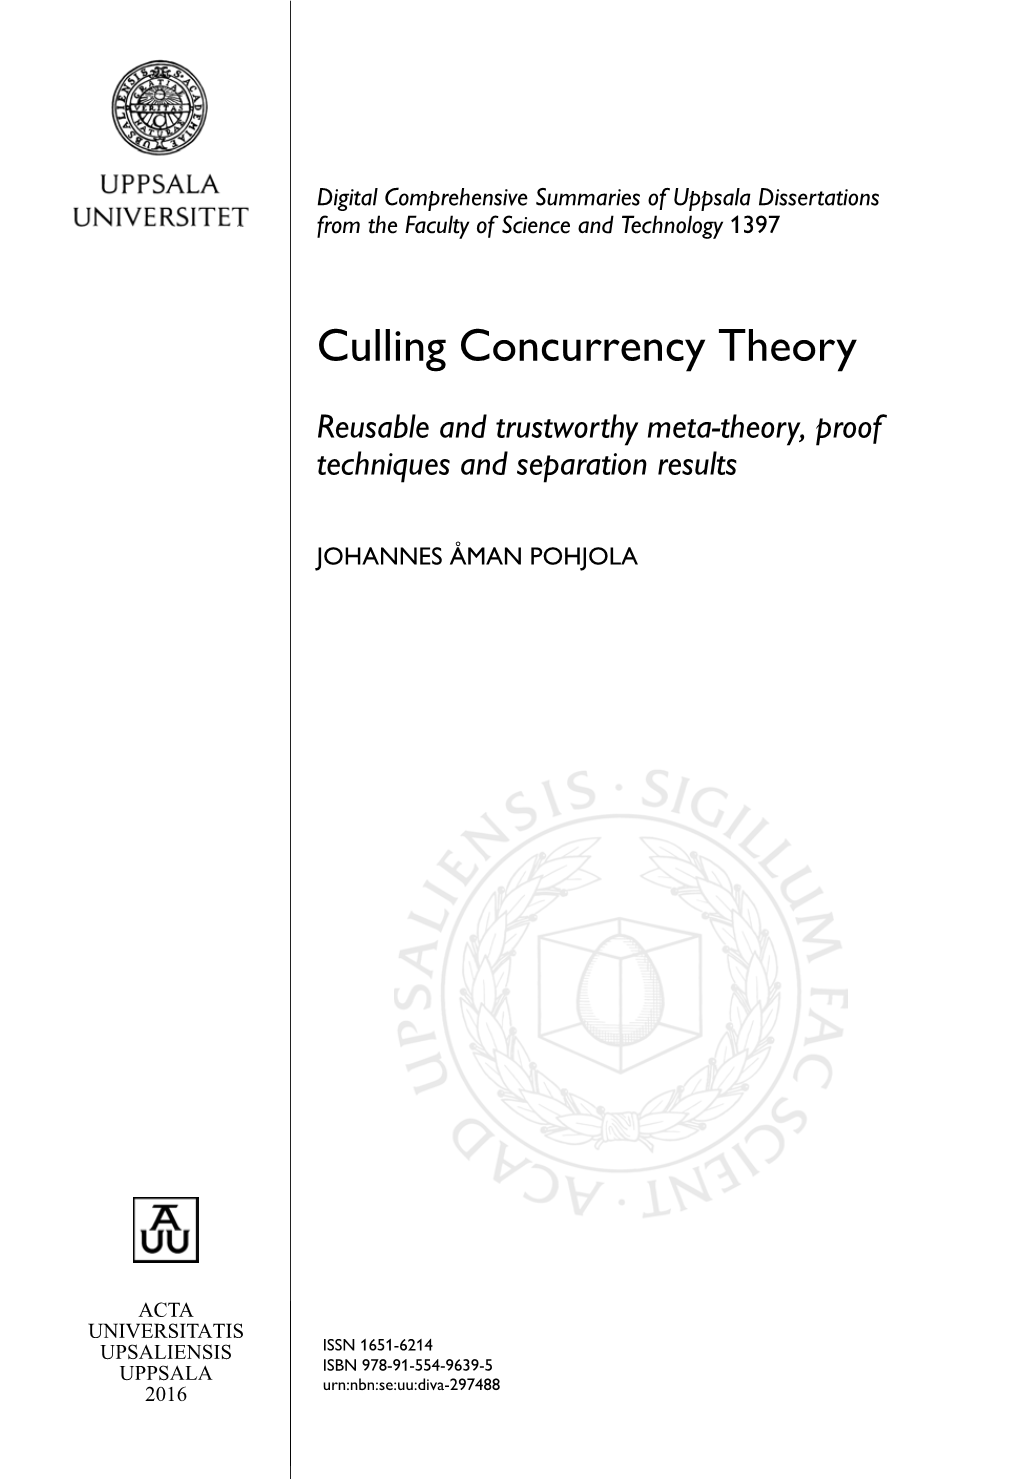 Culling Concurrency Theory